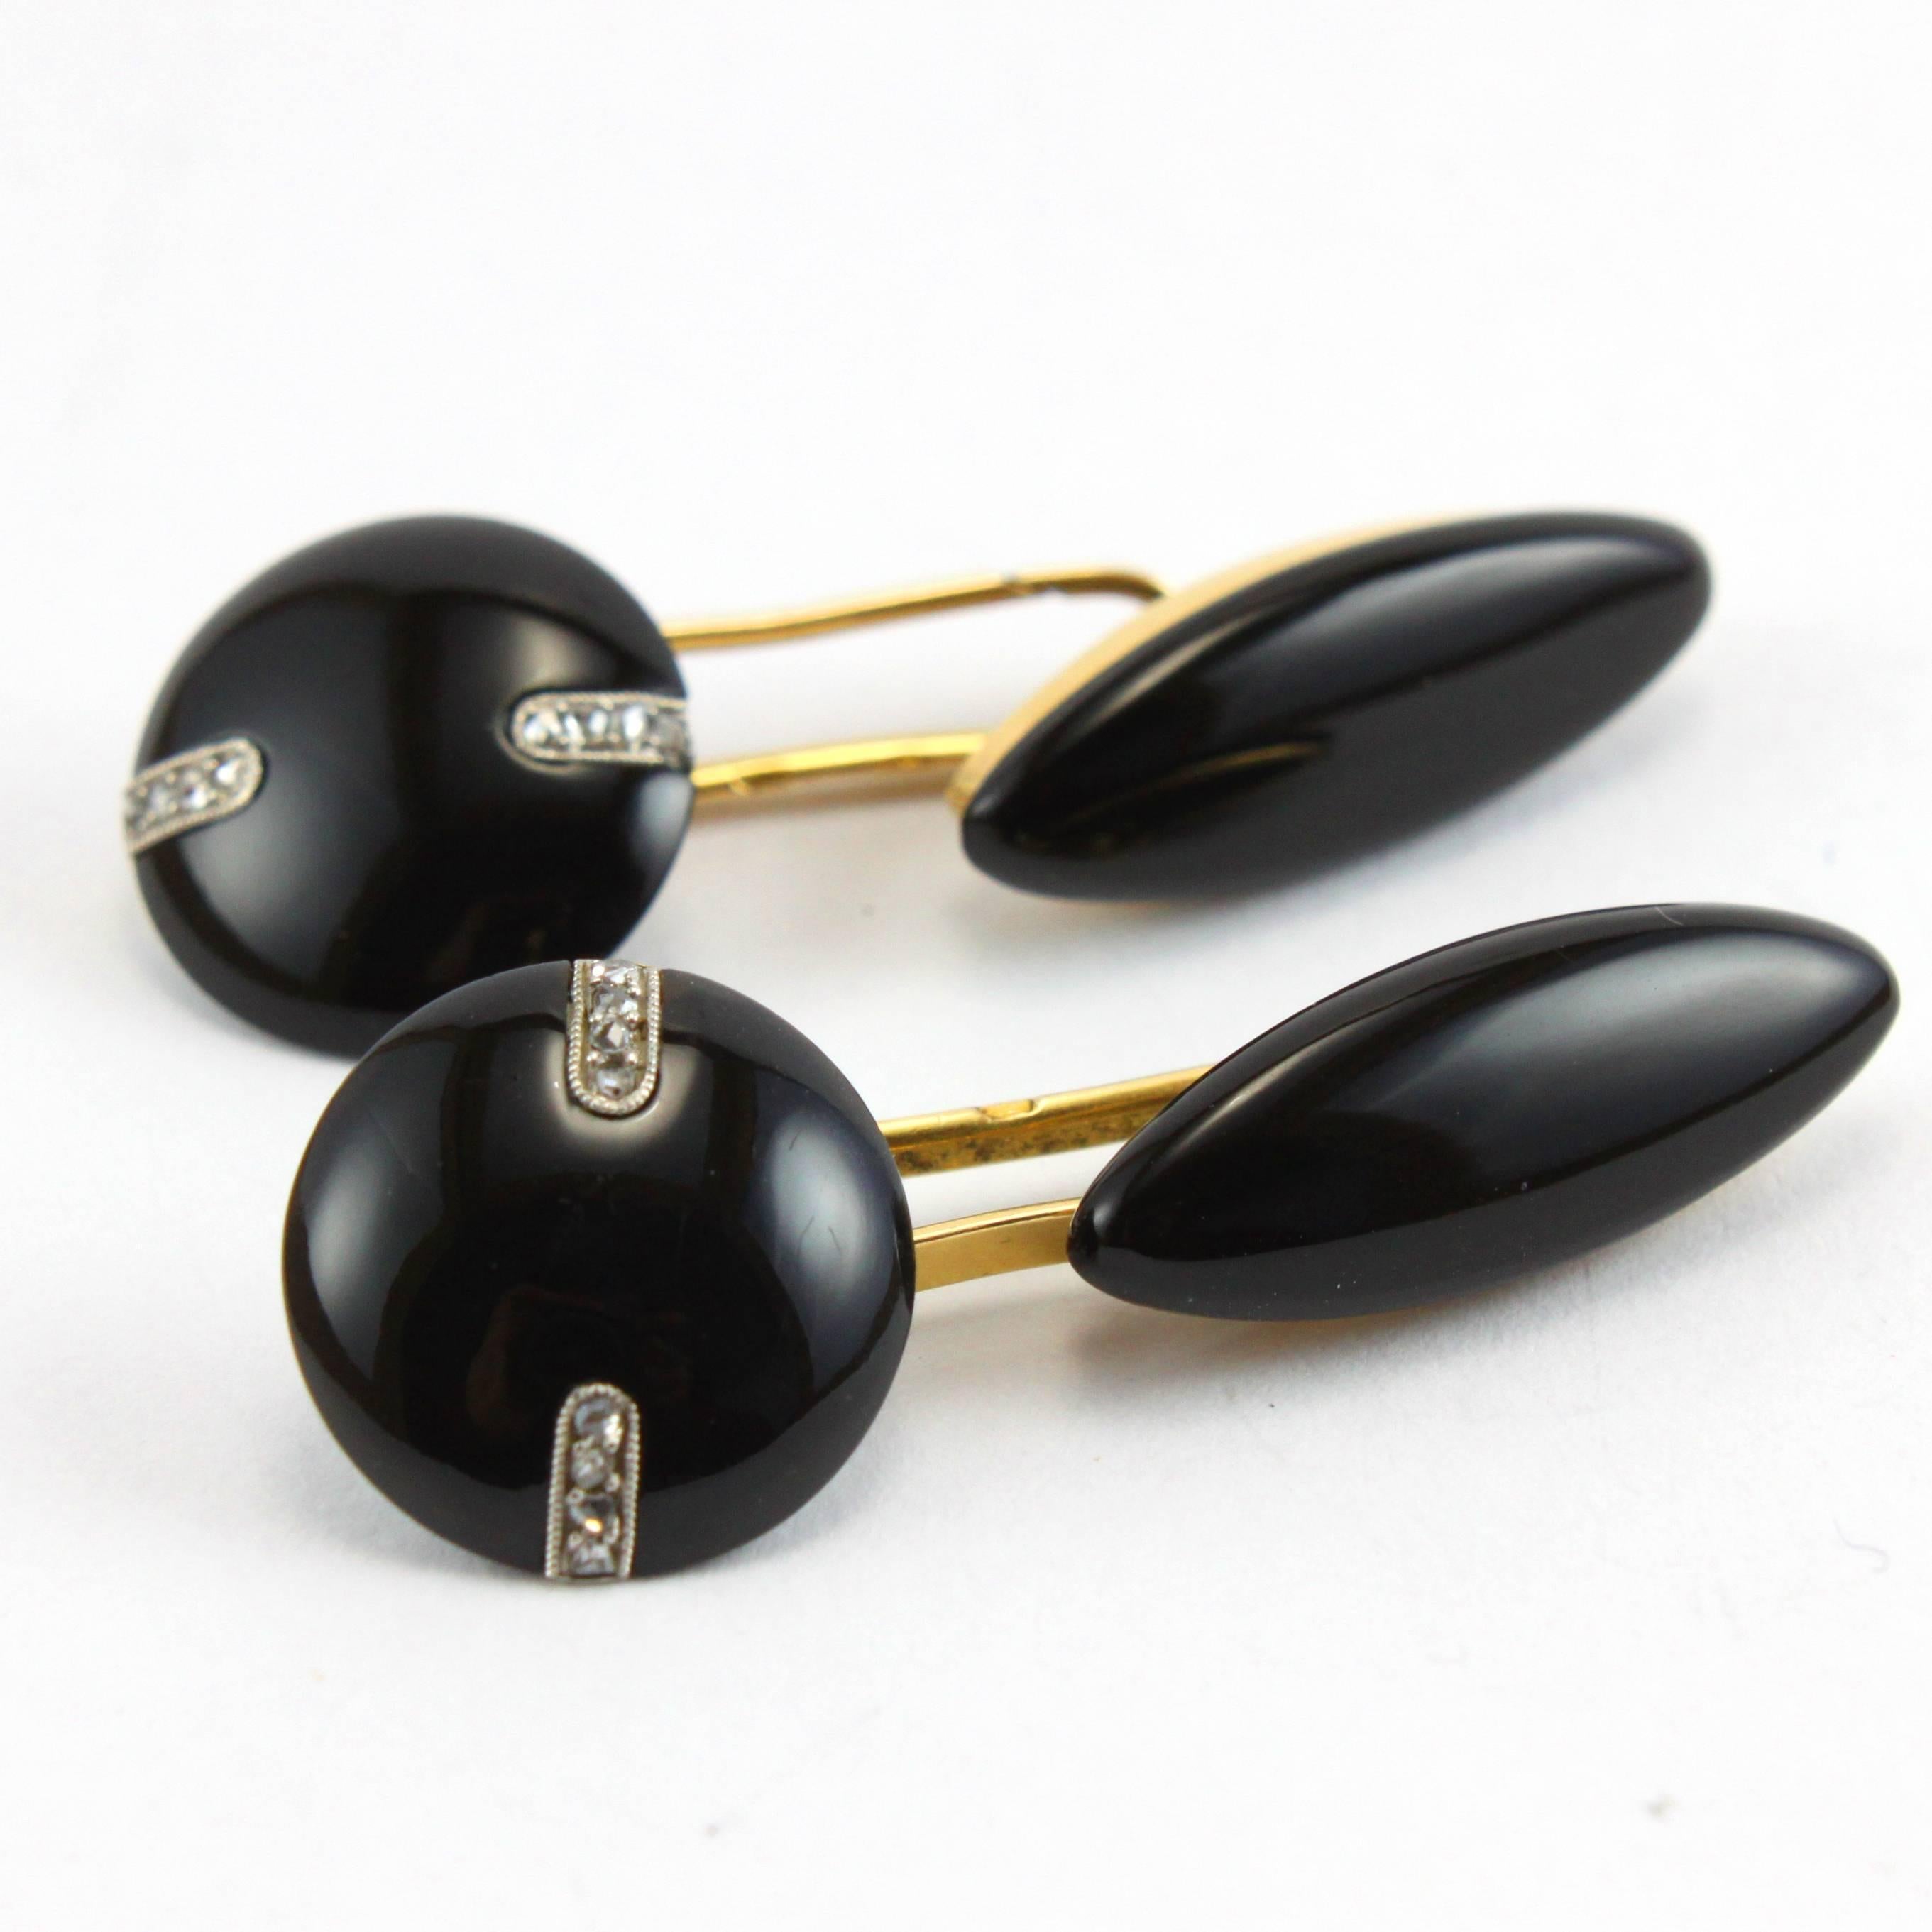 A very elegant pair of Art Deco cufflinks with onyx and rosecut diamonds in 18k yellow gold, French stamp marks.